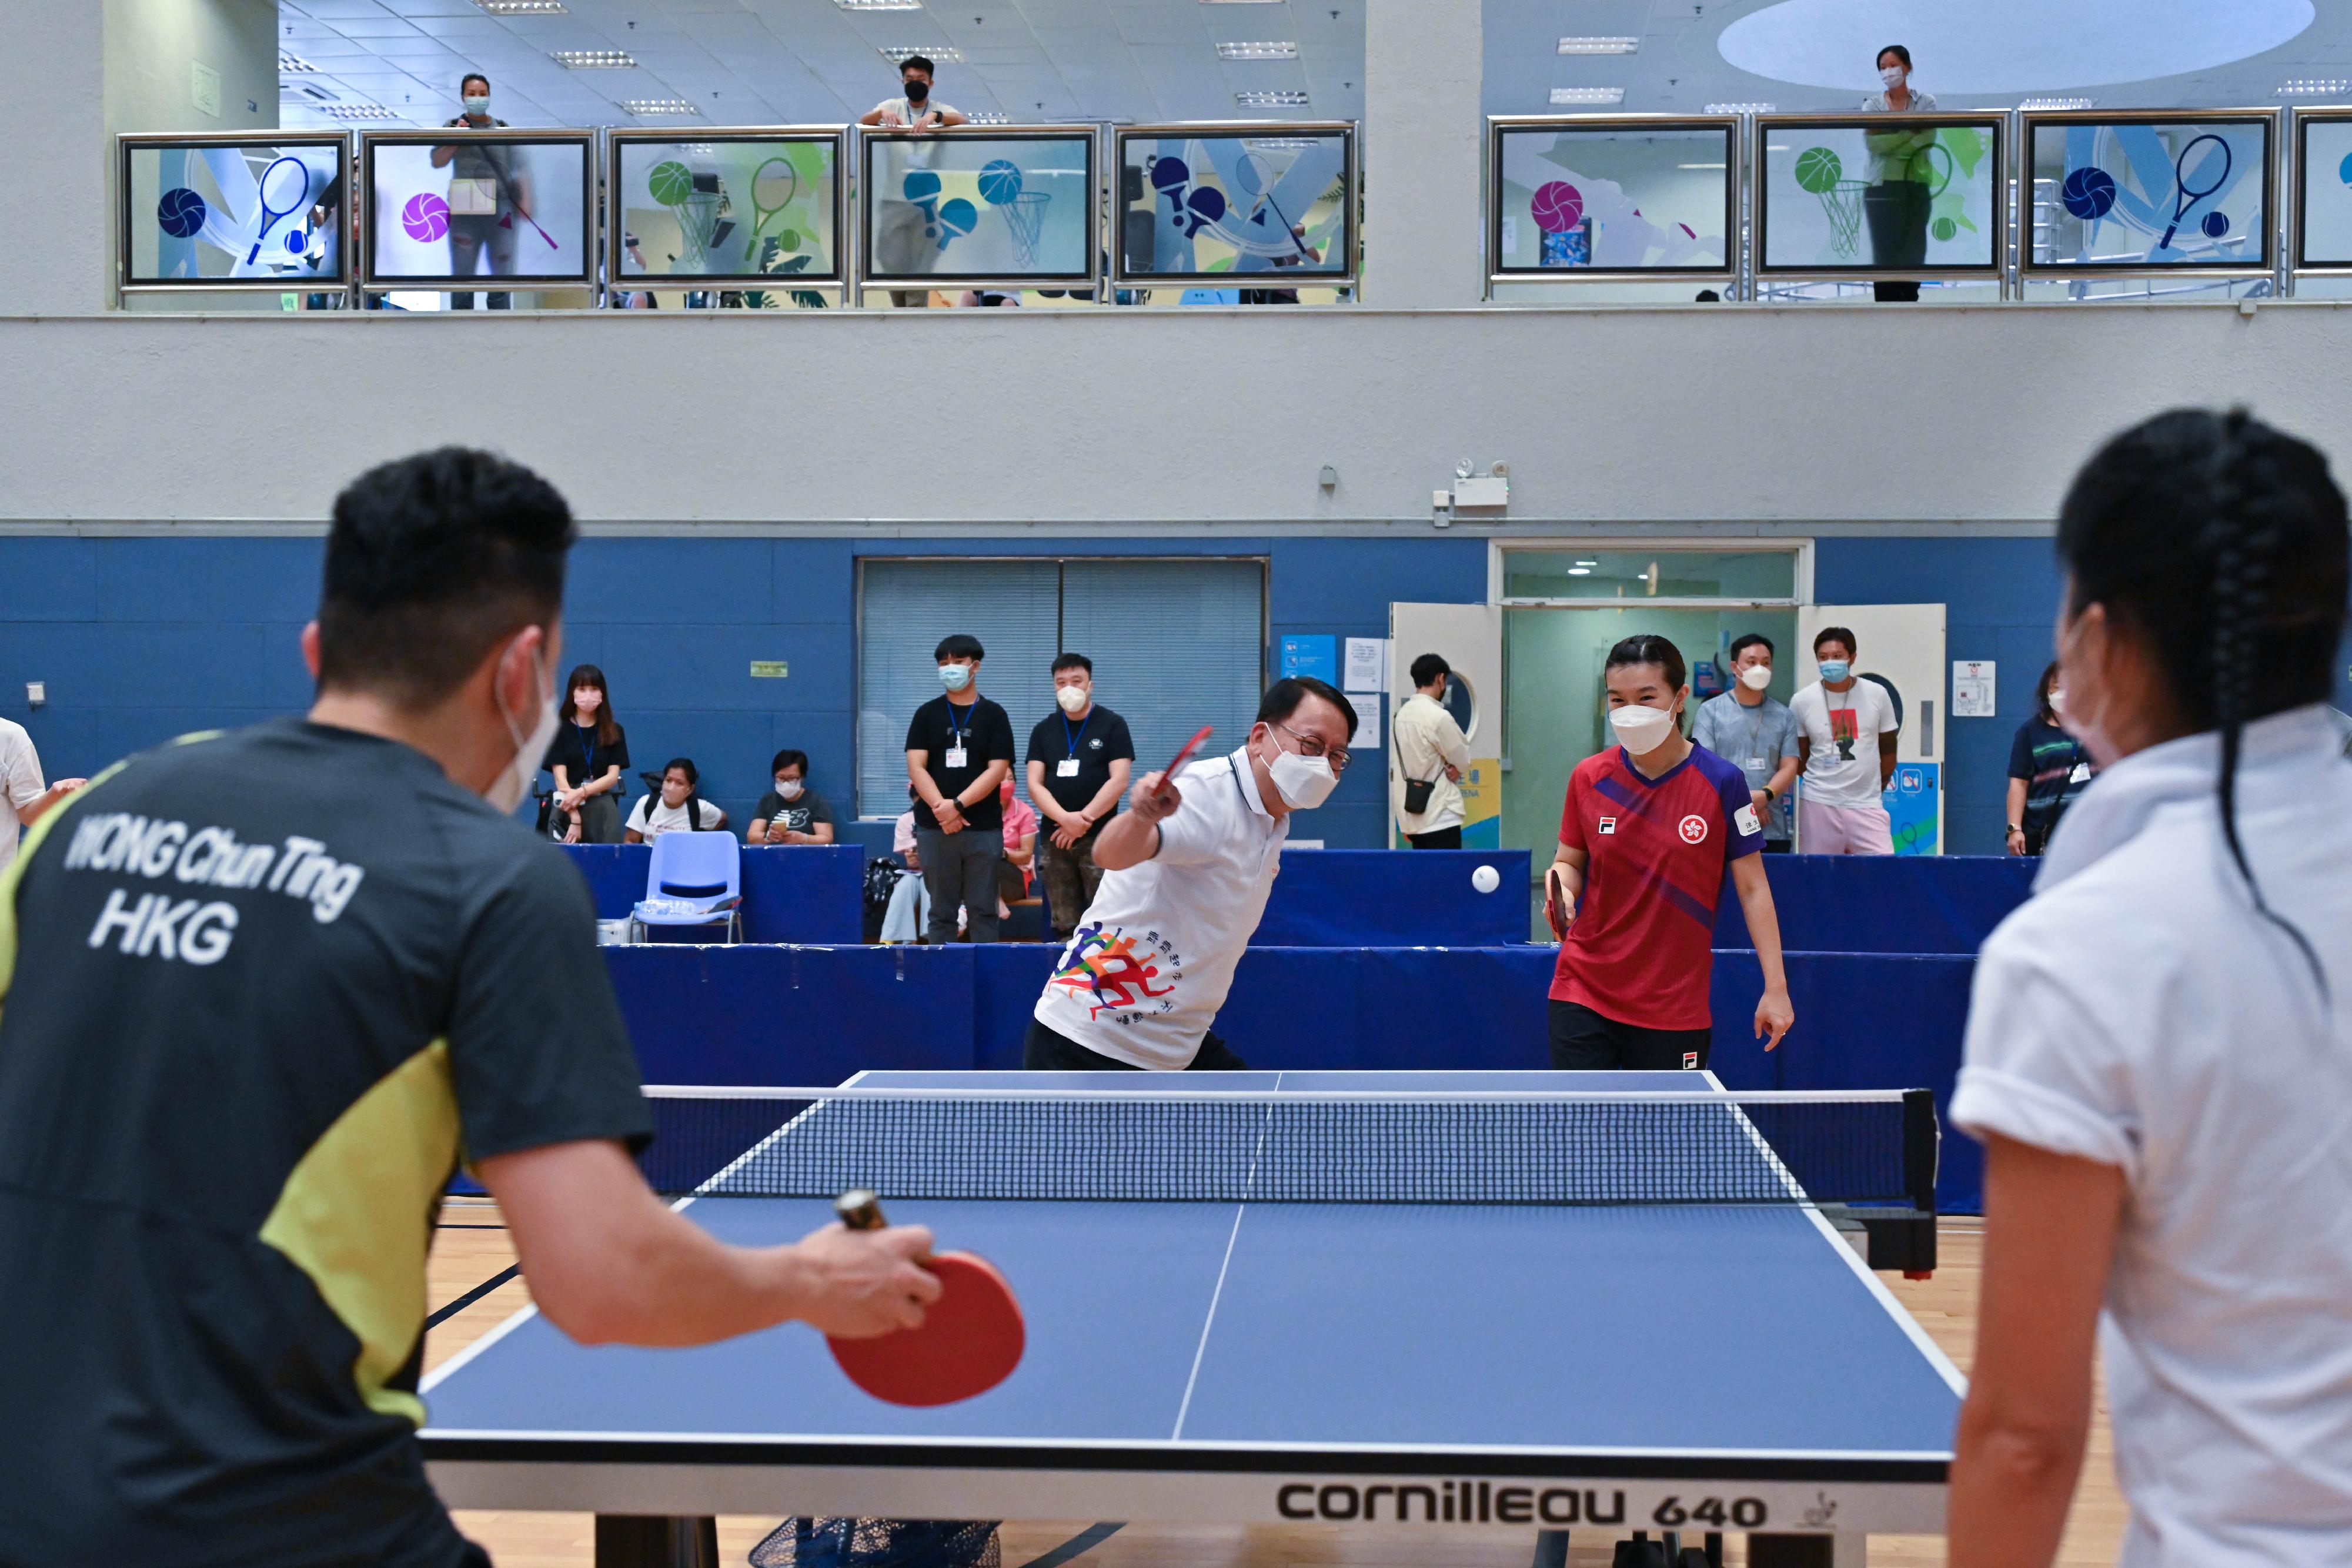 The Chief Secretary for Administration, Mr Chan Kwok-ki, today (August 7) participated in the Sport for All Day 2022 organised by the Leisure and Cultural Services Department and played table tennis with Hong Kong athletes at Fu Heng Sports Centre.